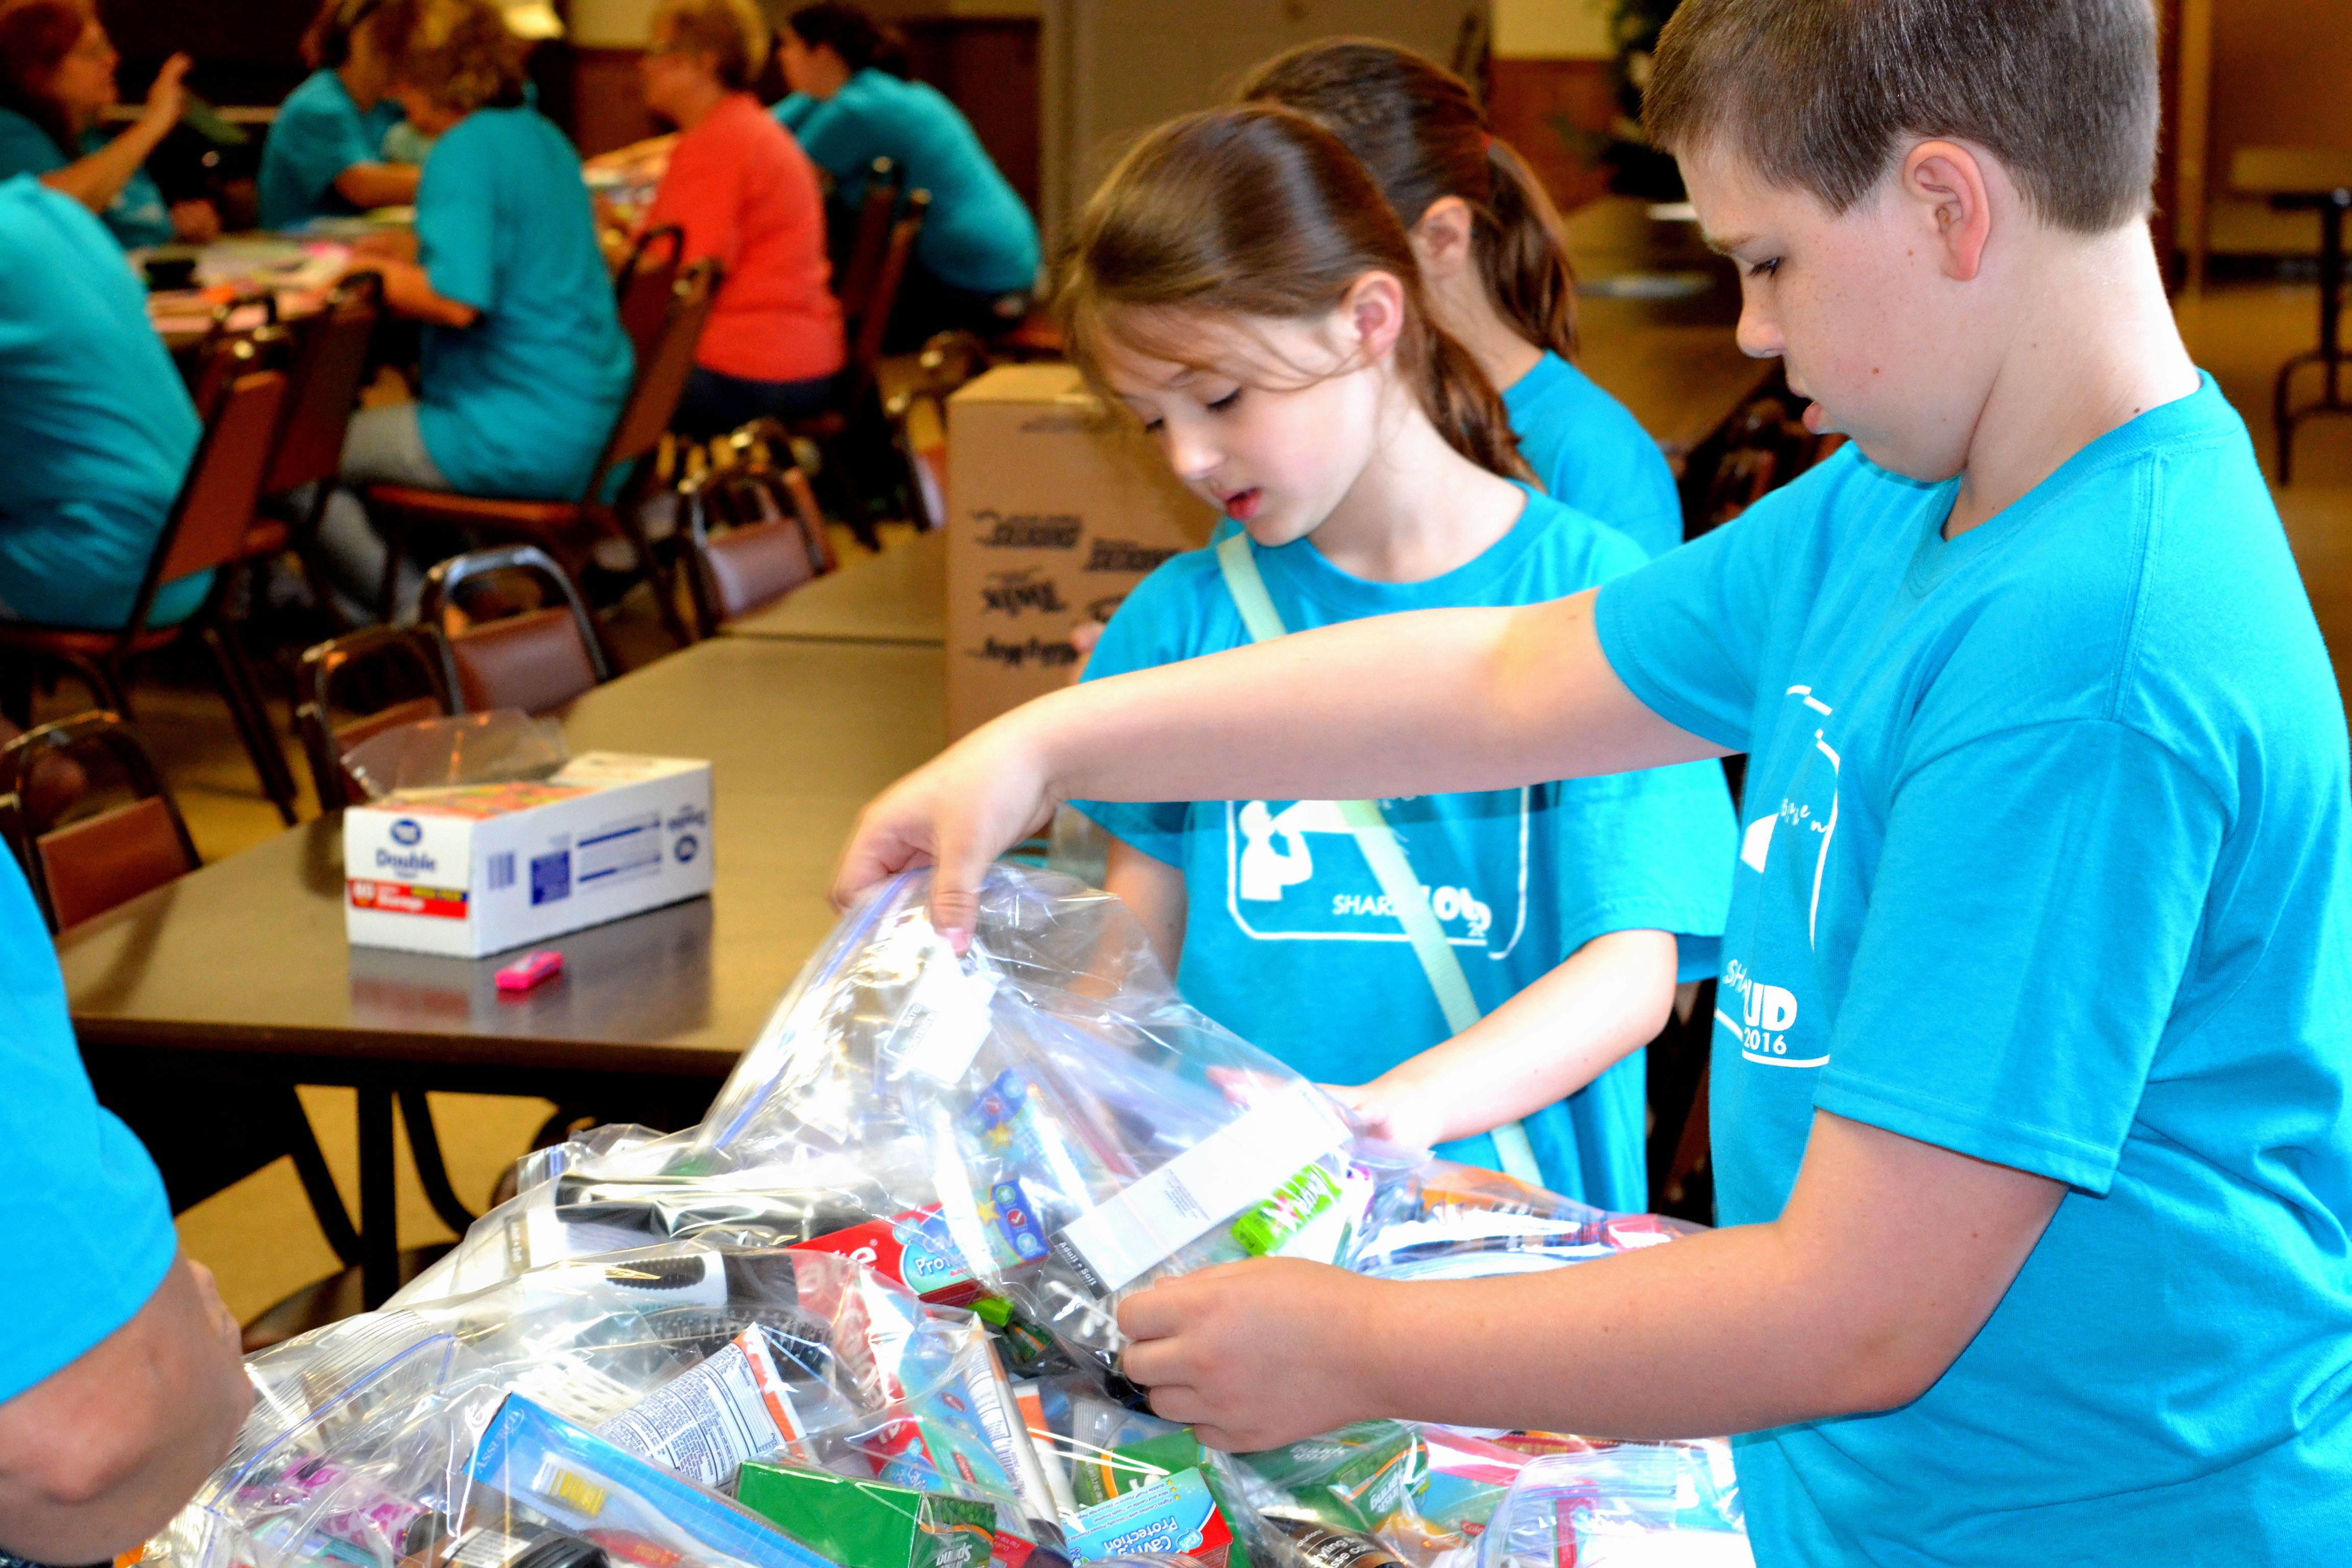 2nd-5th grade Sunday School class assembling bags for Tar Heel Middle School students